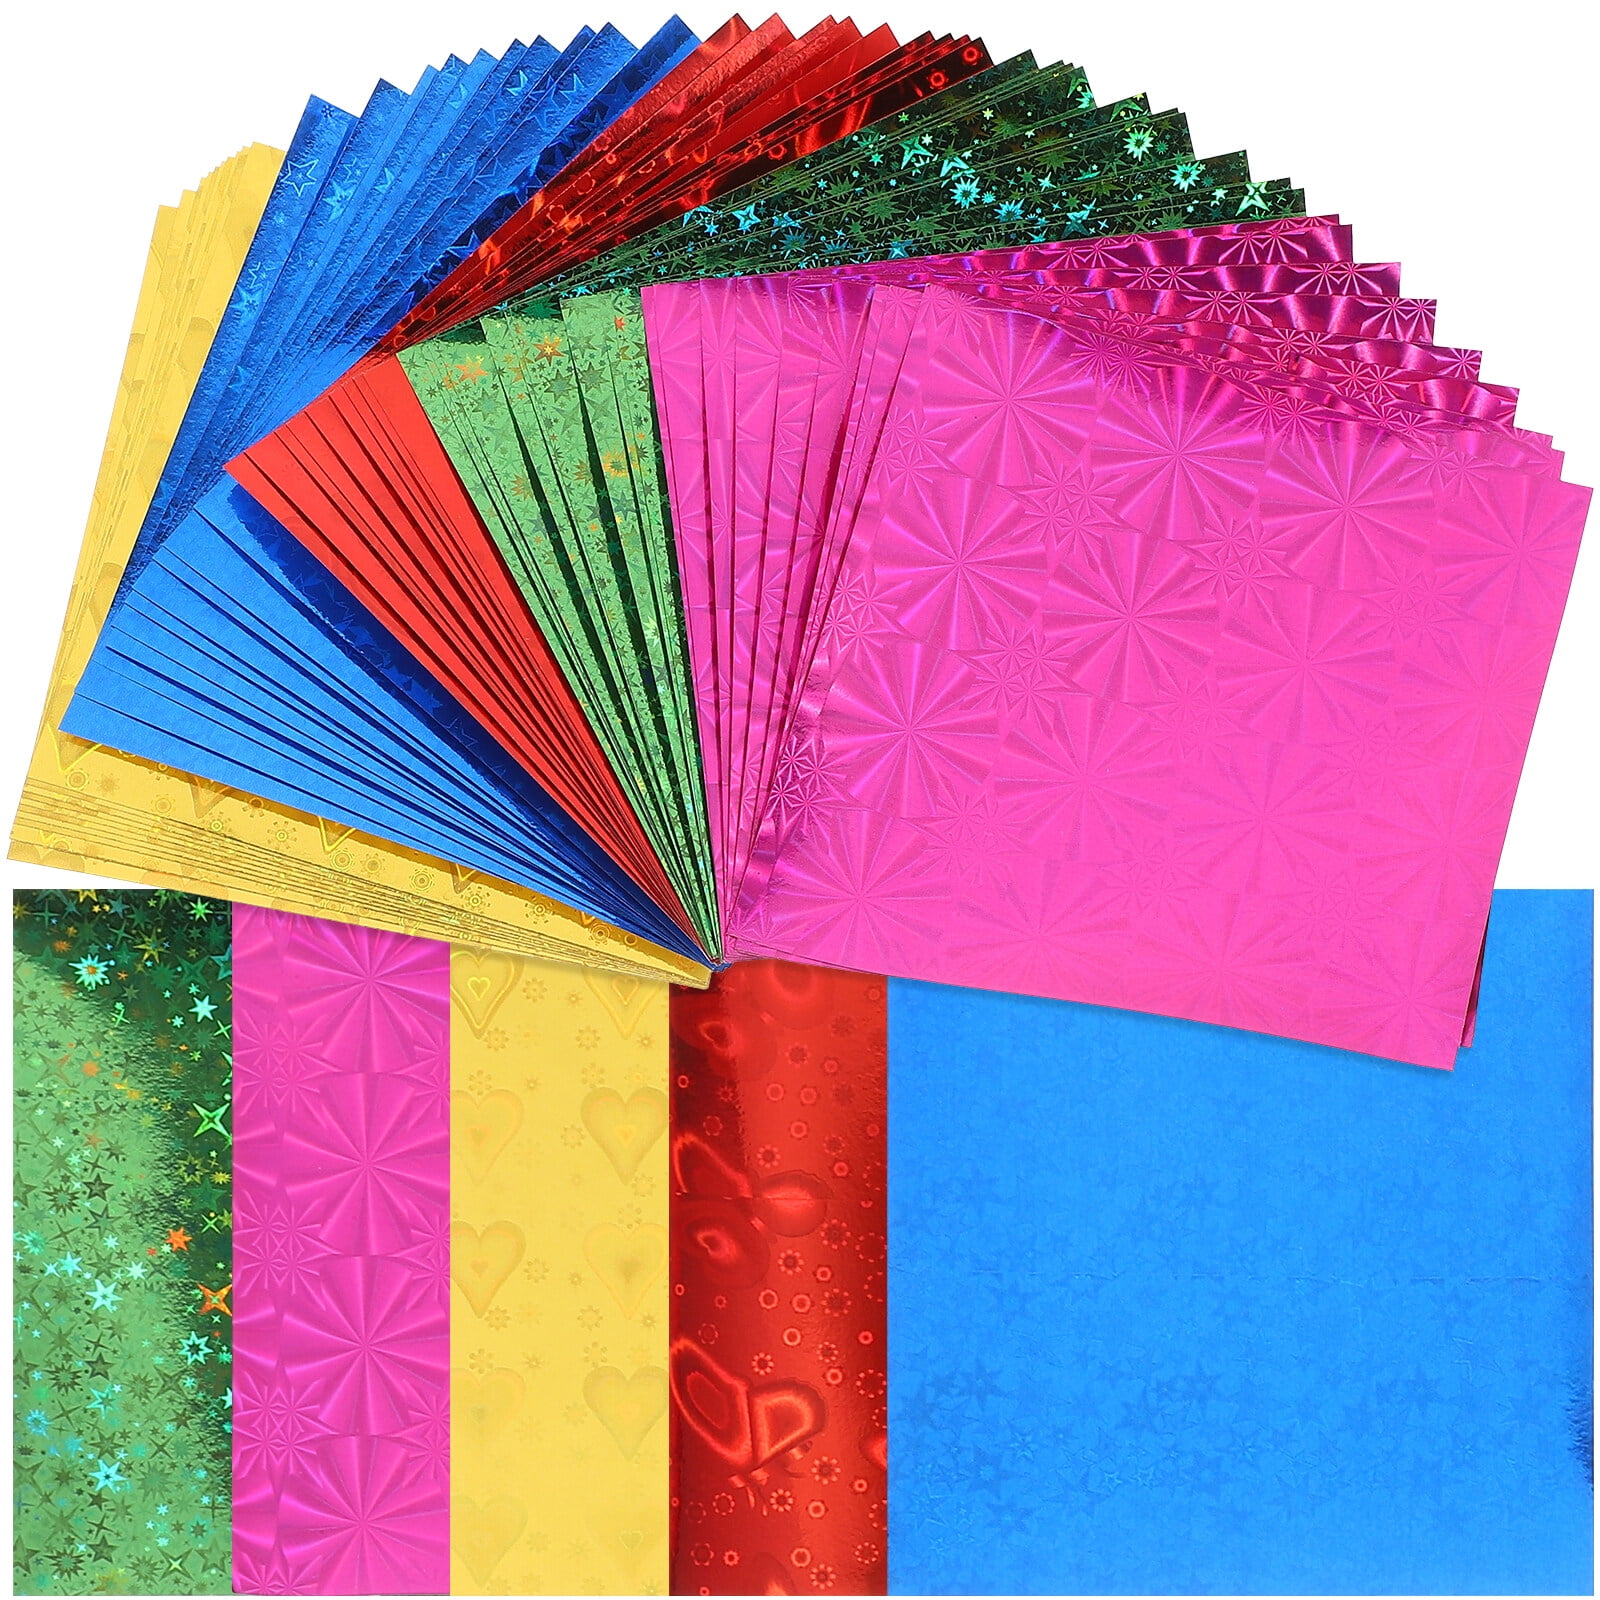 Wholesale 8x8 origami paper To Turn Your Imagination Into Reality